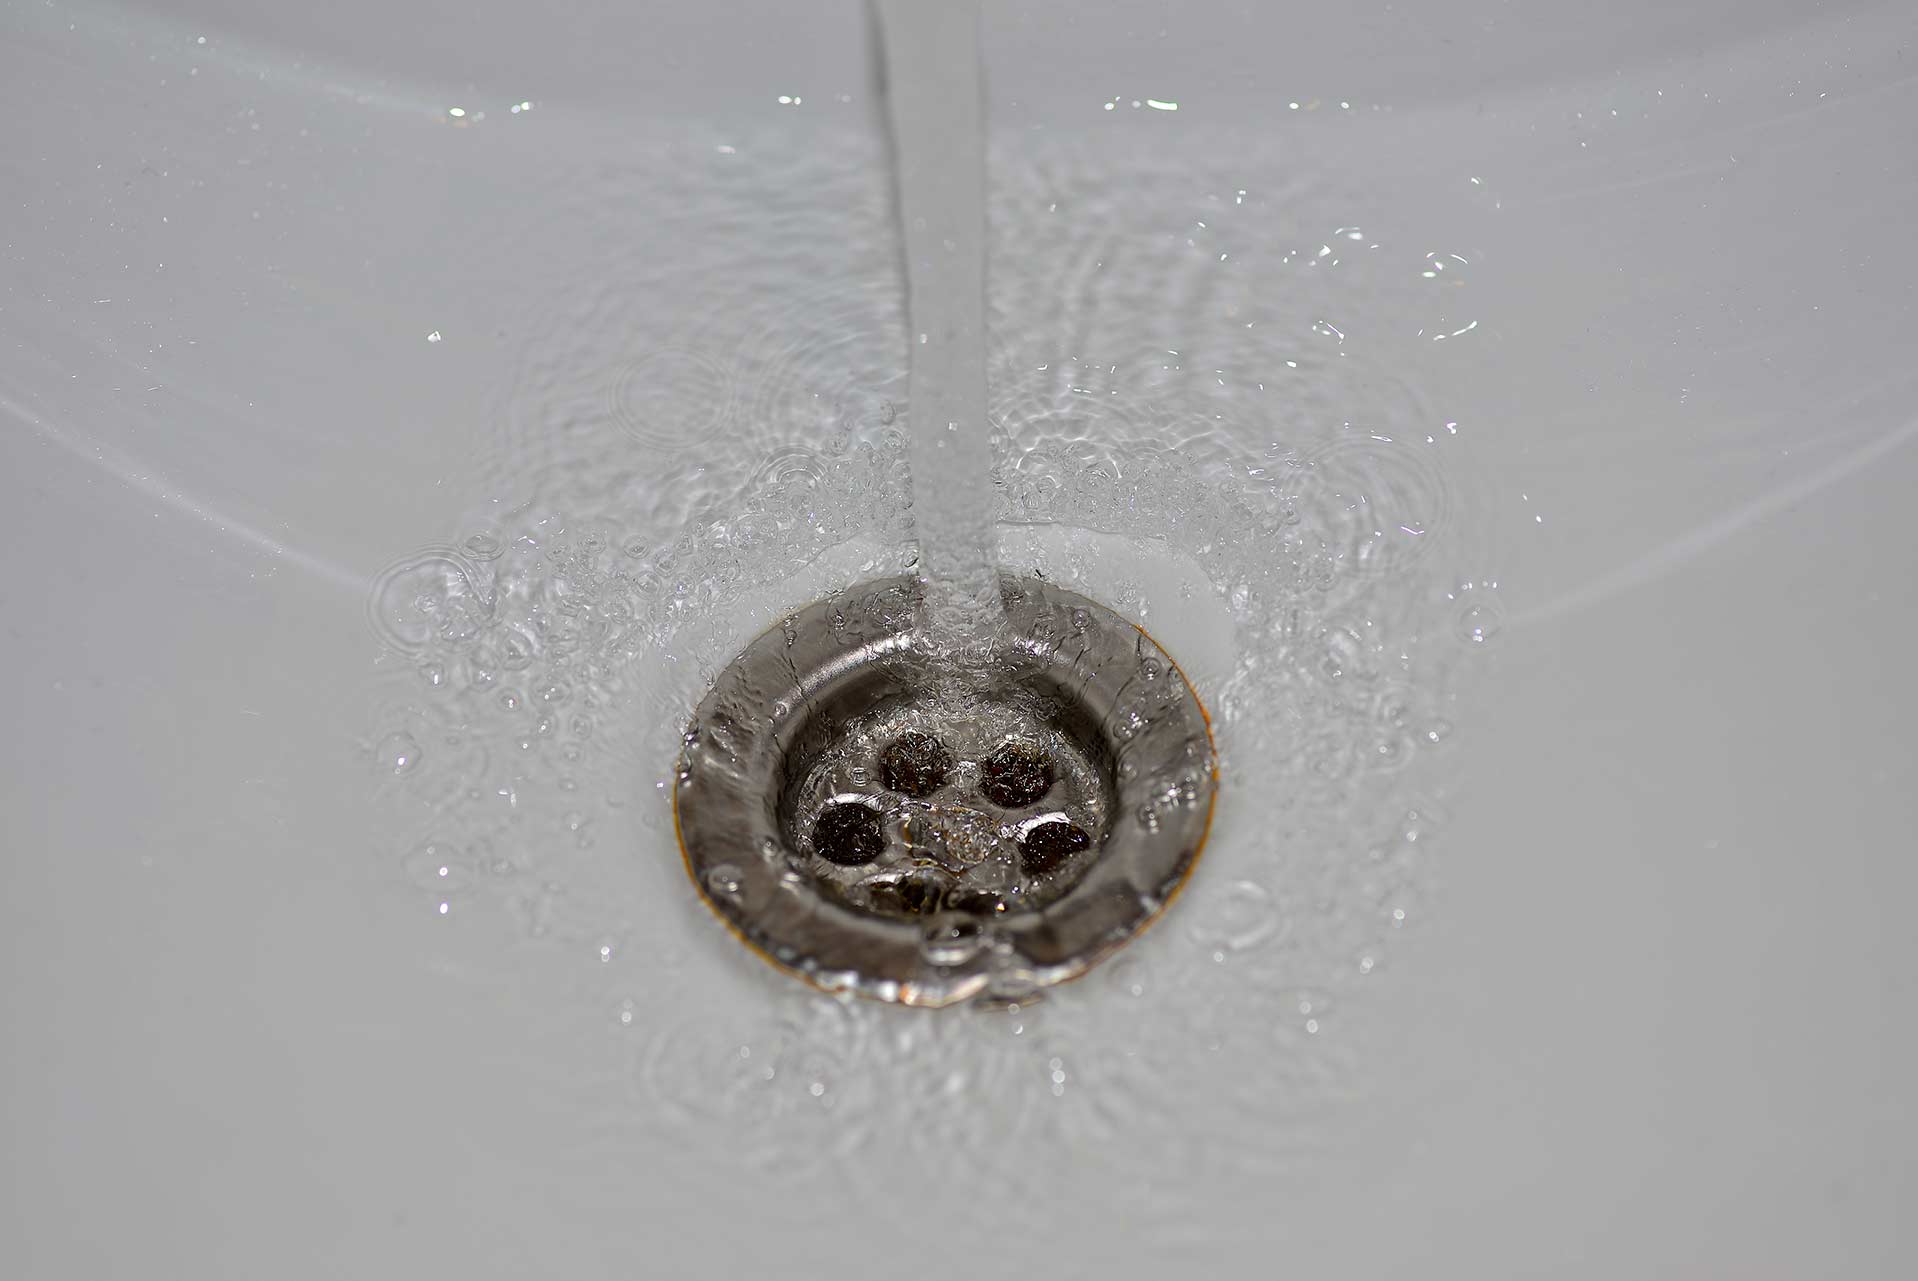 A2B Drains provides services to unblock blocked sinks and drains for properties in Thurrock.